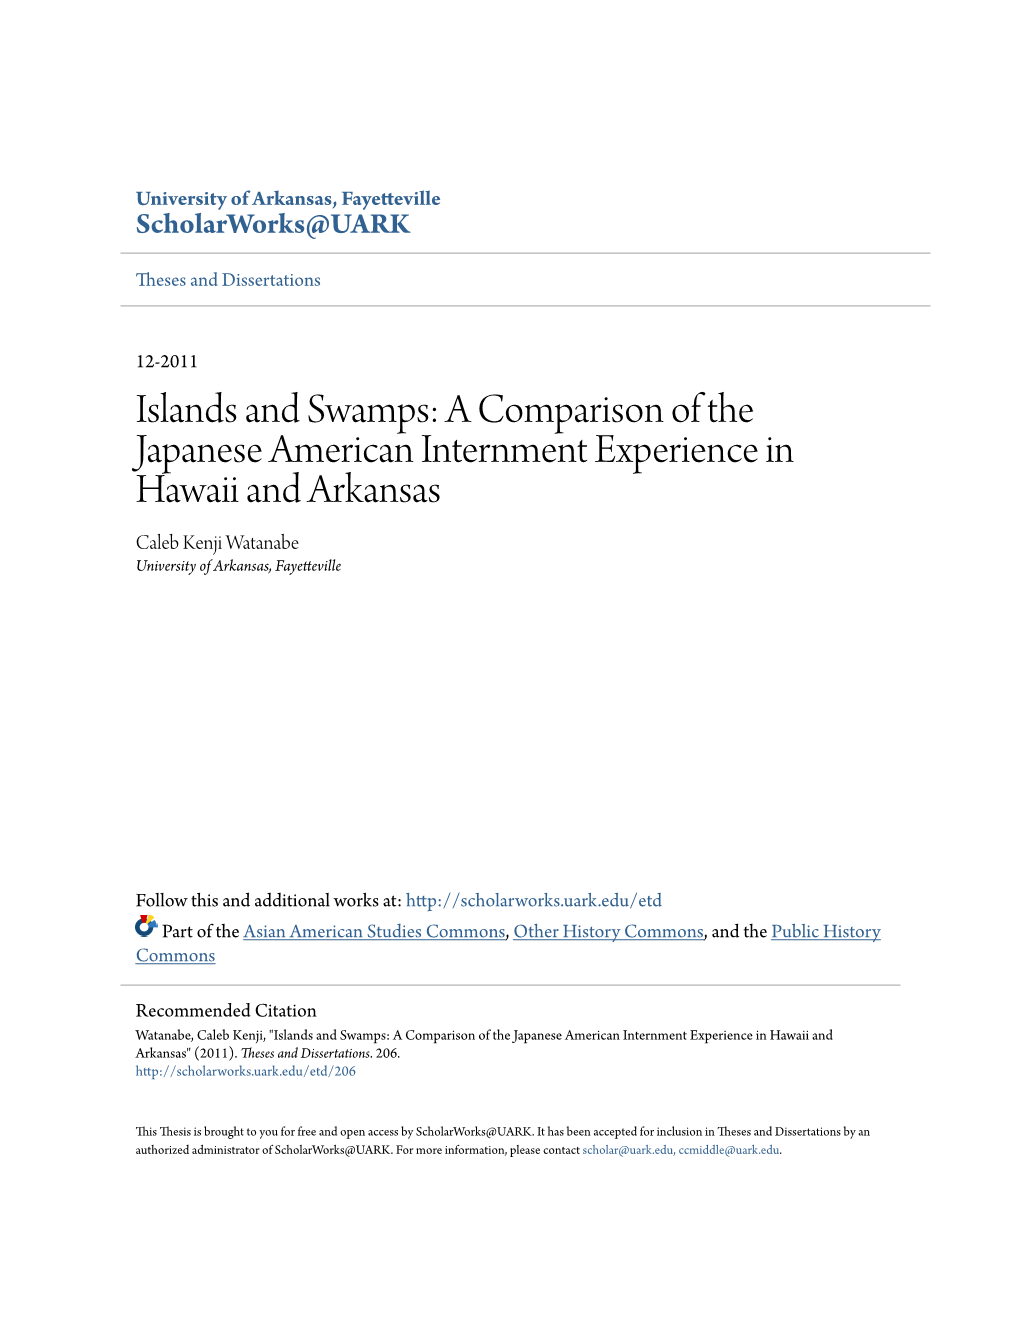 A Comparison of the Japanese American Internment Experience in Hawaii and Arkansas Caleb Kenji Watanabe University of Arkansas, Fayetteville